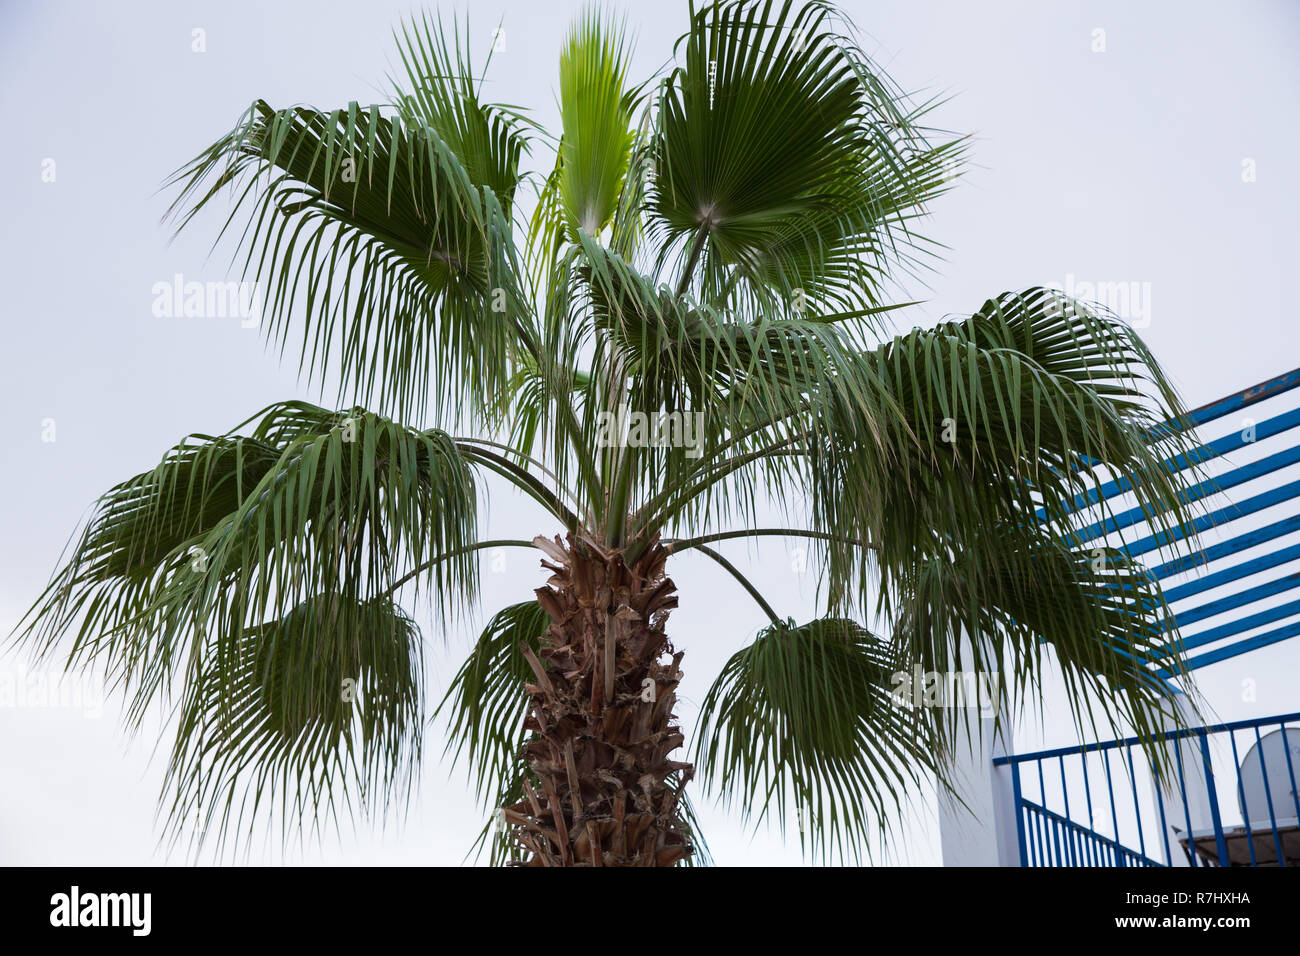 City Paphos, Cyprus. Big green palm at street. Travel photo 2018, december. Green leafs. Stock Photo